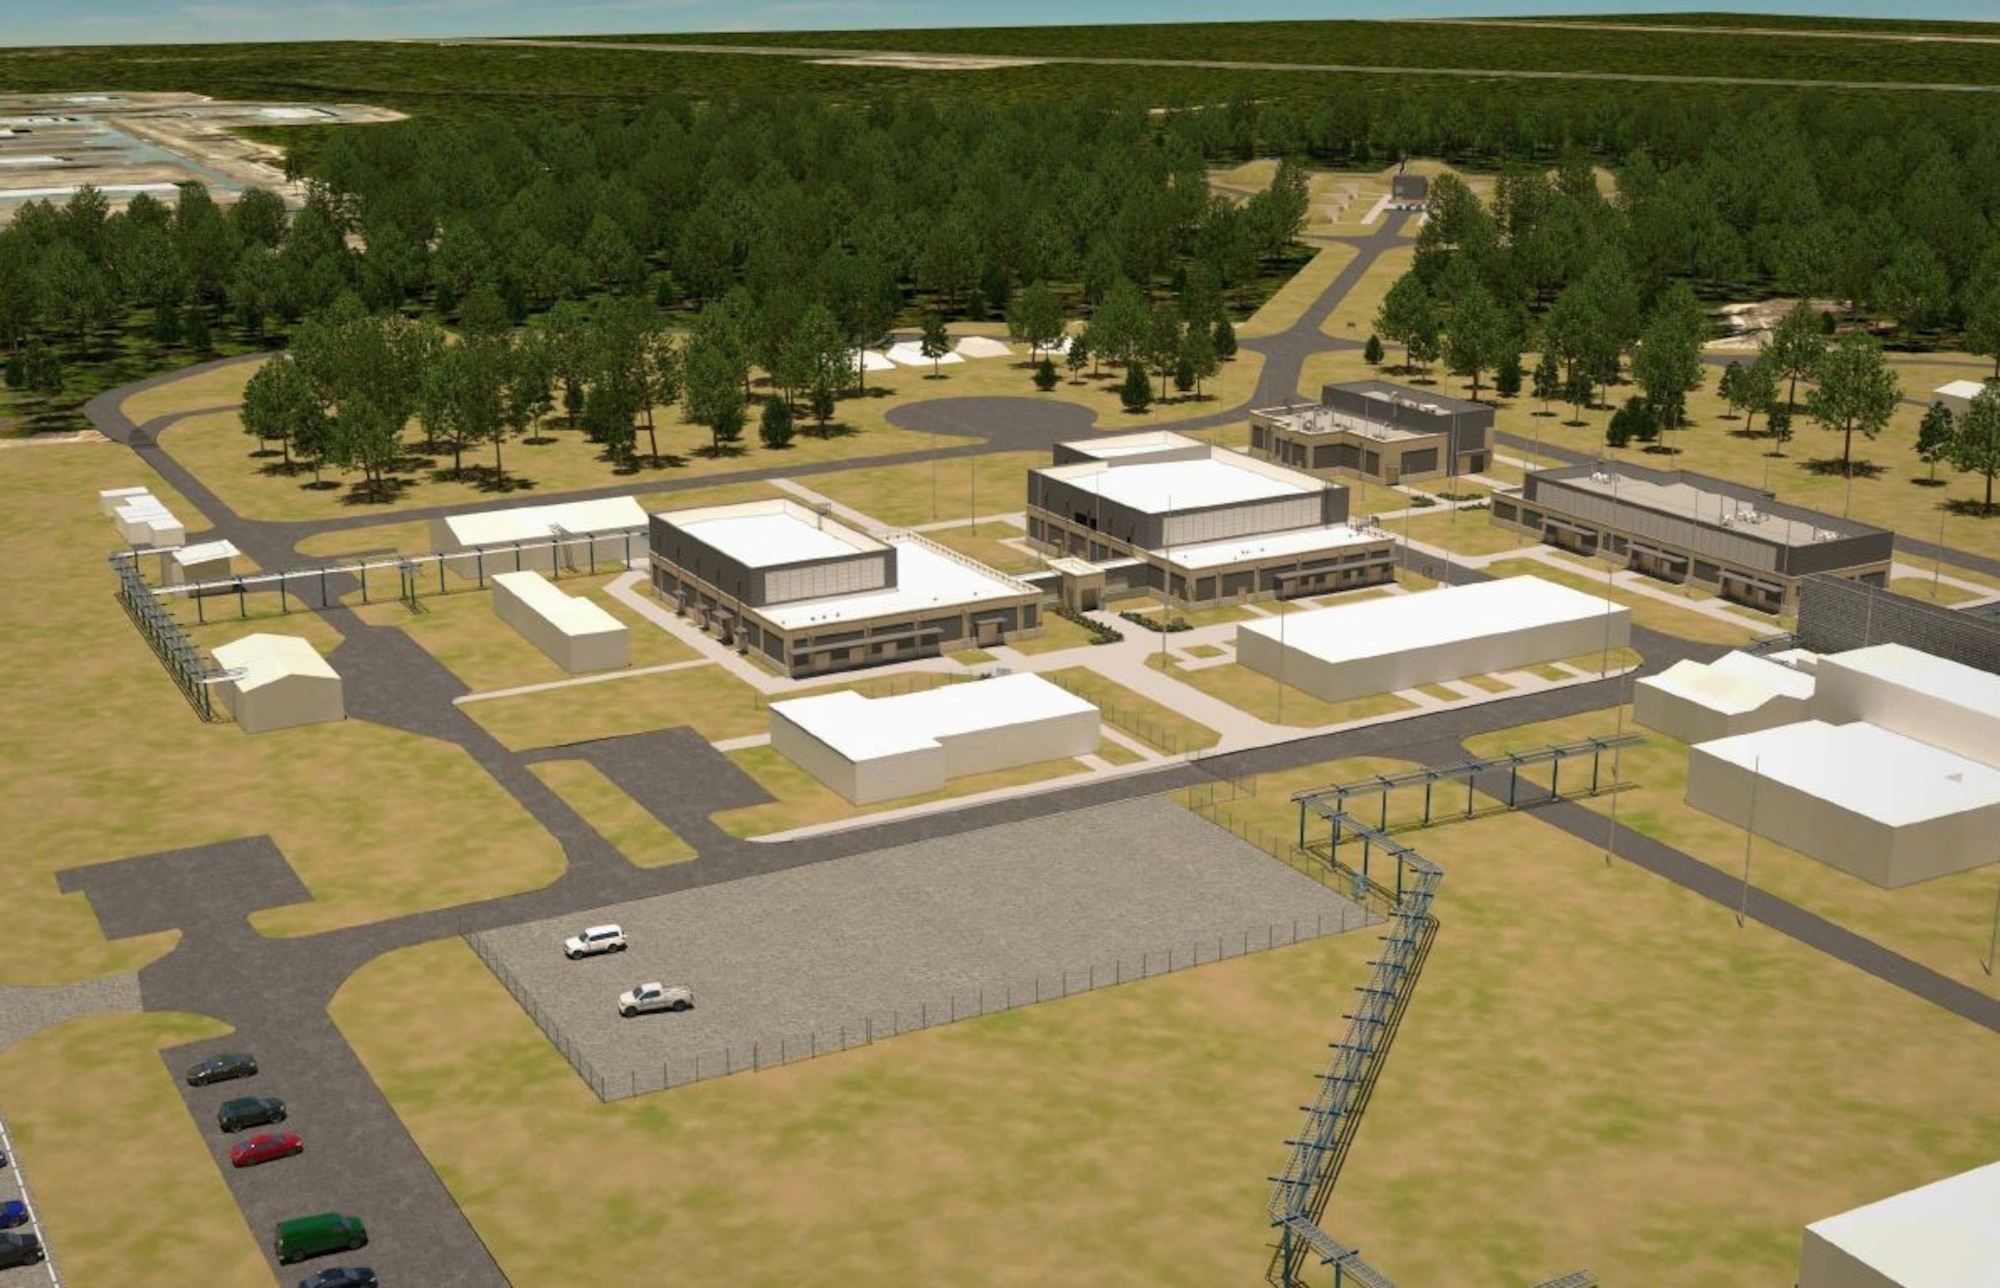 An artist's rendering of the overall site perspective of the Advanced Munitions Technology Complex at Eglin AFB, Florida.